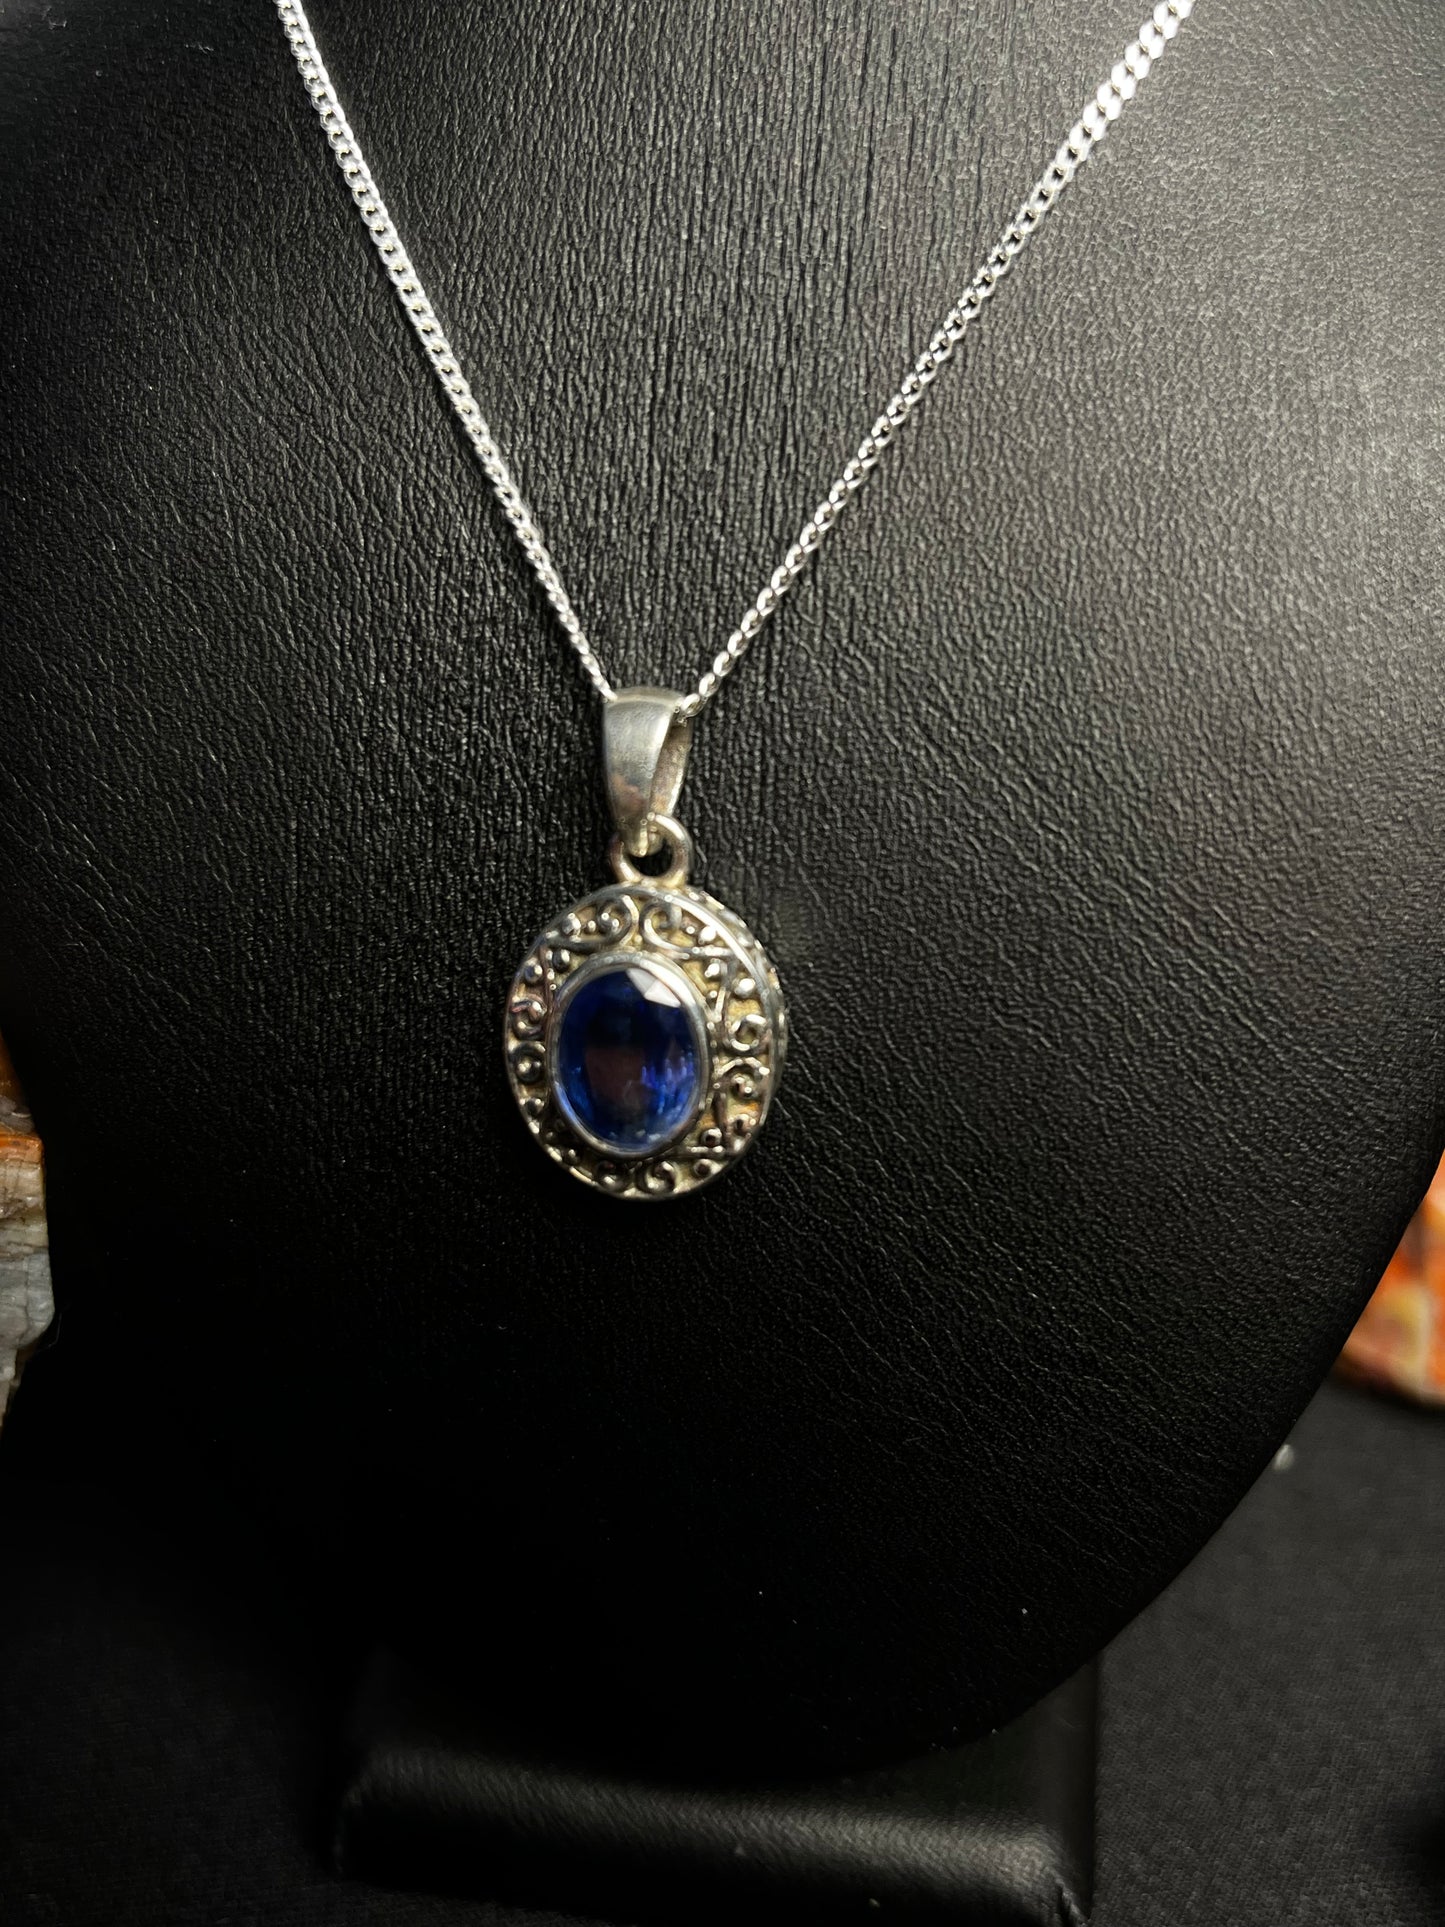 Natural Kyanite Pendant in 925 sterling silver with 22" sterling silver chain